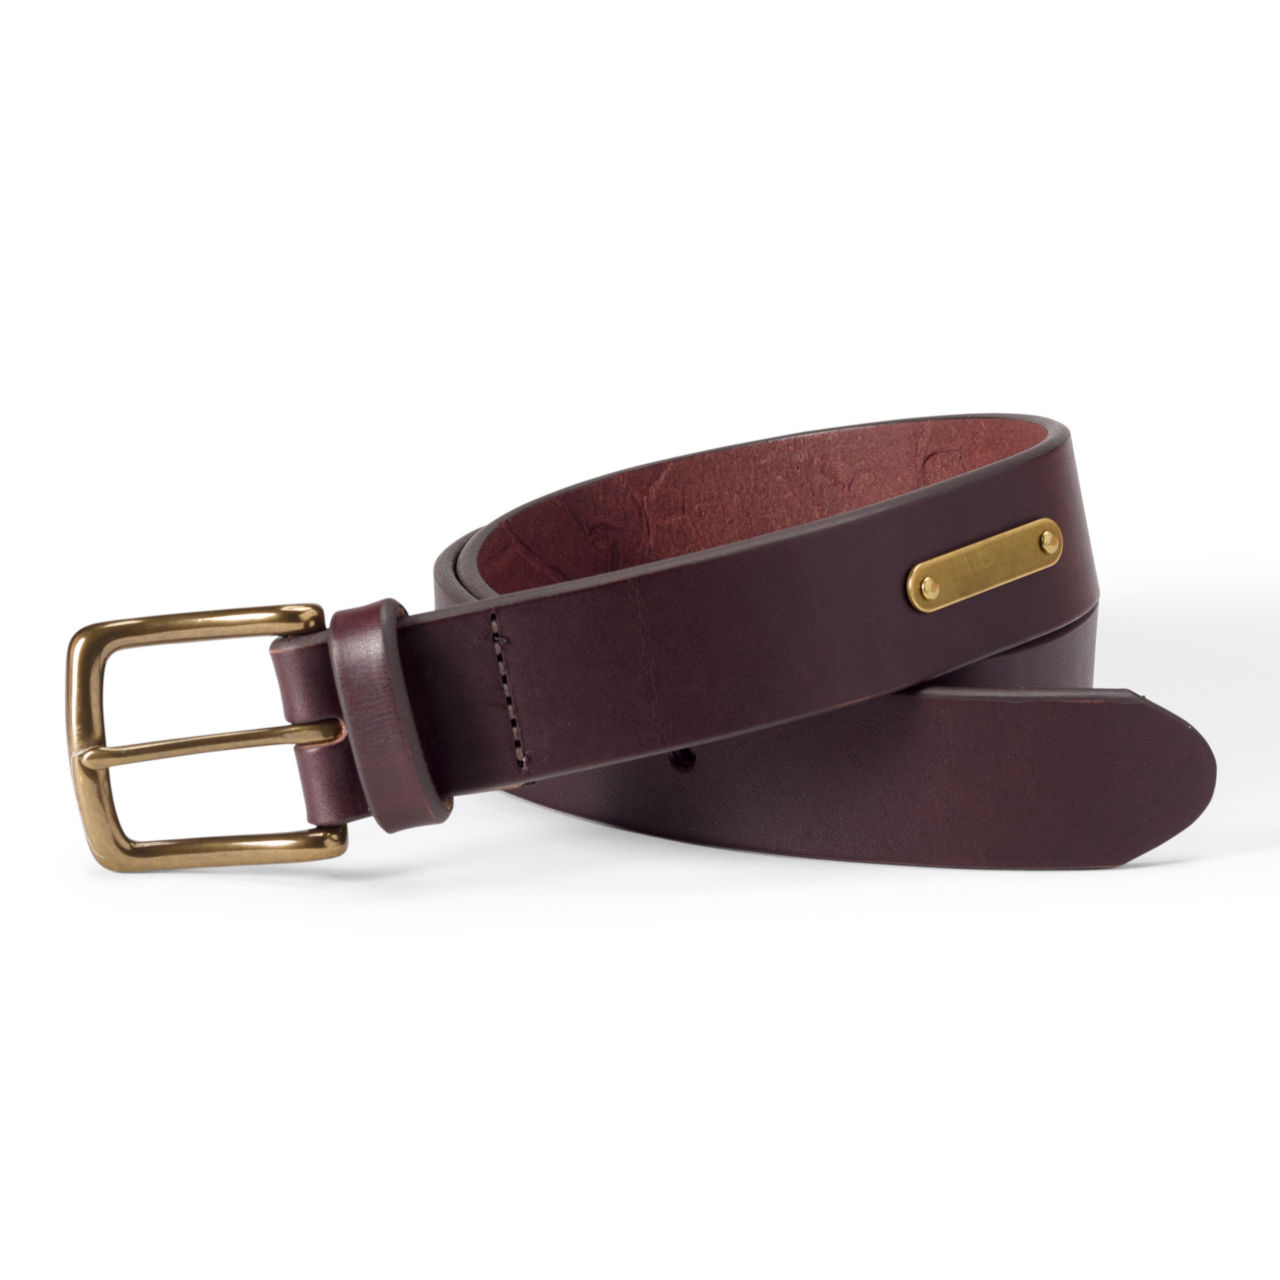 Personalized Leather Belt - BROWN image number 0